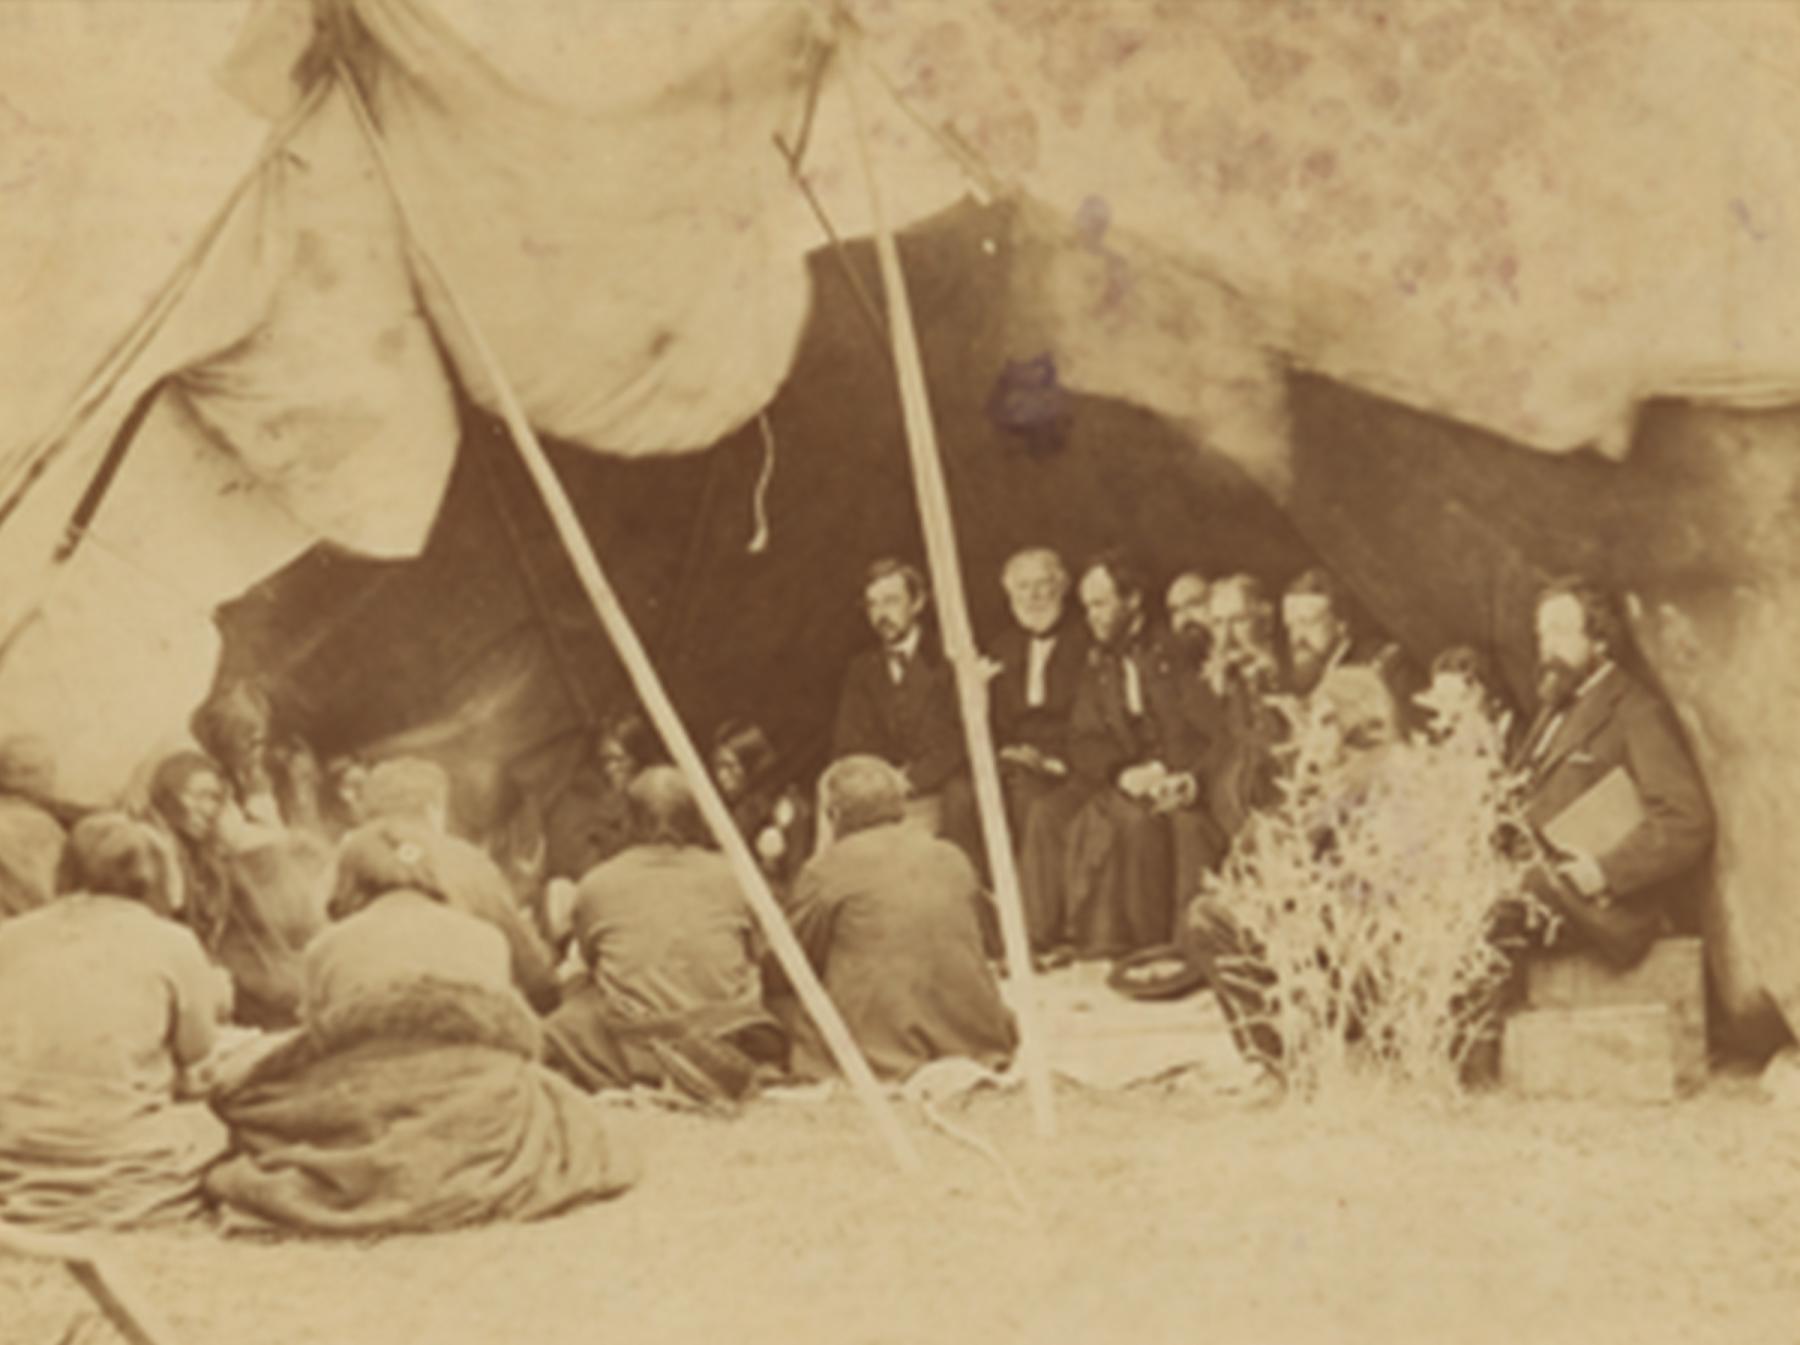 Indian Peace Commissioners in council with the Northern Cheyenne and Northern Arapaho at Fort Laramie, May 1868. The commissioners are, left to right: Col. Samuel F. Tappan, Gen. William S. Harney, Gen. William Tecumseh Sherman, John B. Sanborn, Gen. Christopher C. Augur, Gen. Alfred H. Terry, and Ashton S. H. White, commission secretary. This may be Gardner’s best-known image. William T. Sherman collection of Alexander Gardner photographs; National Museum of the American Indian (NMAI)Archive Center, Smiths